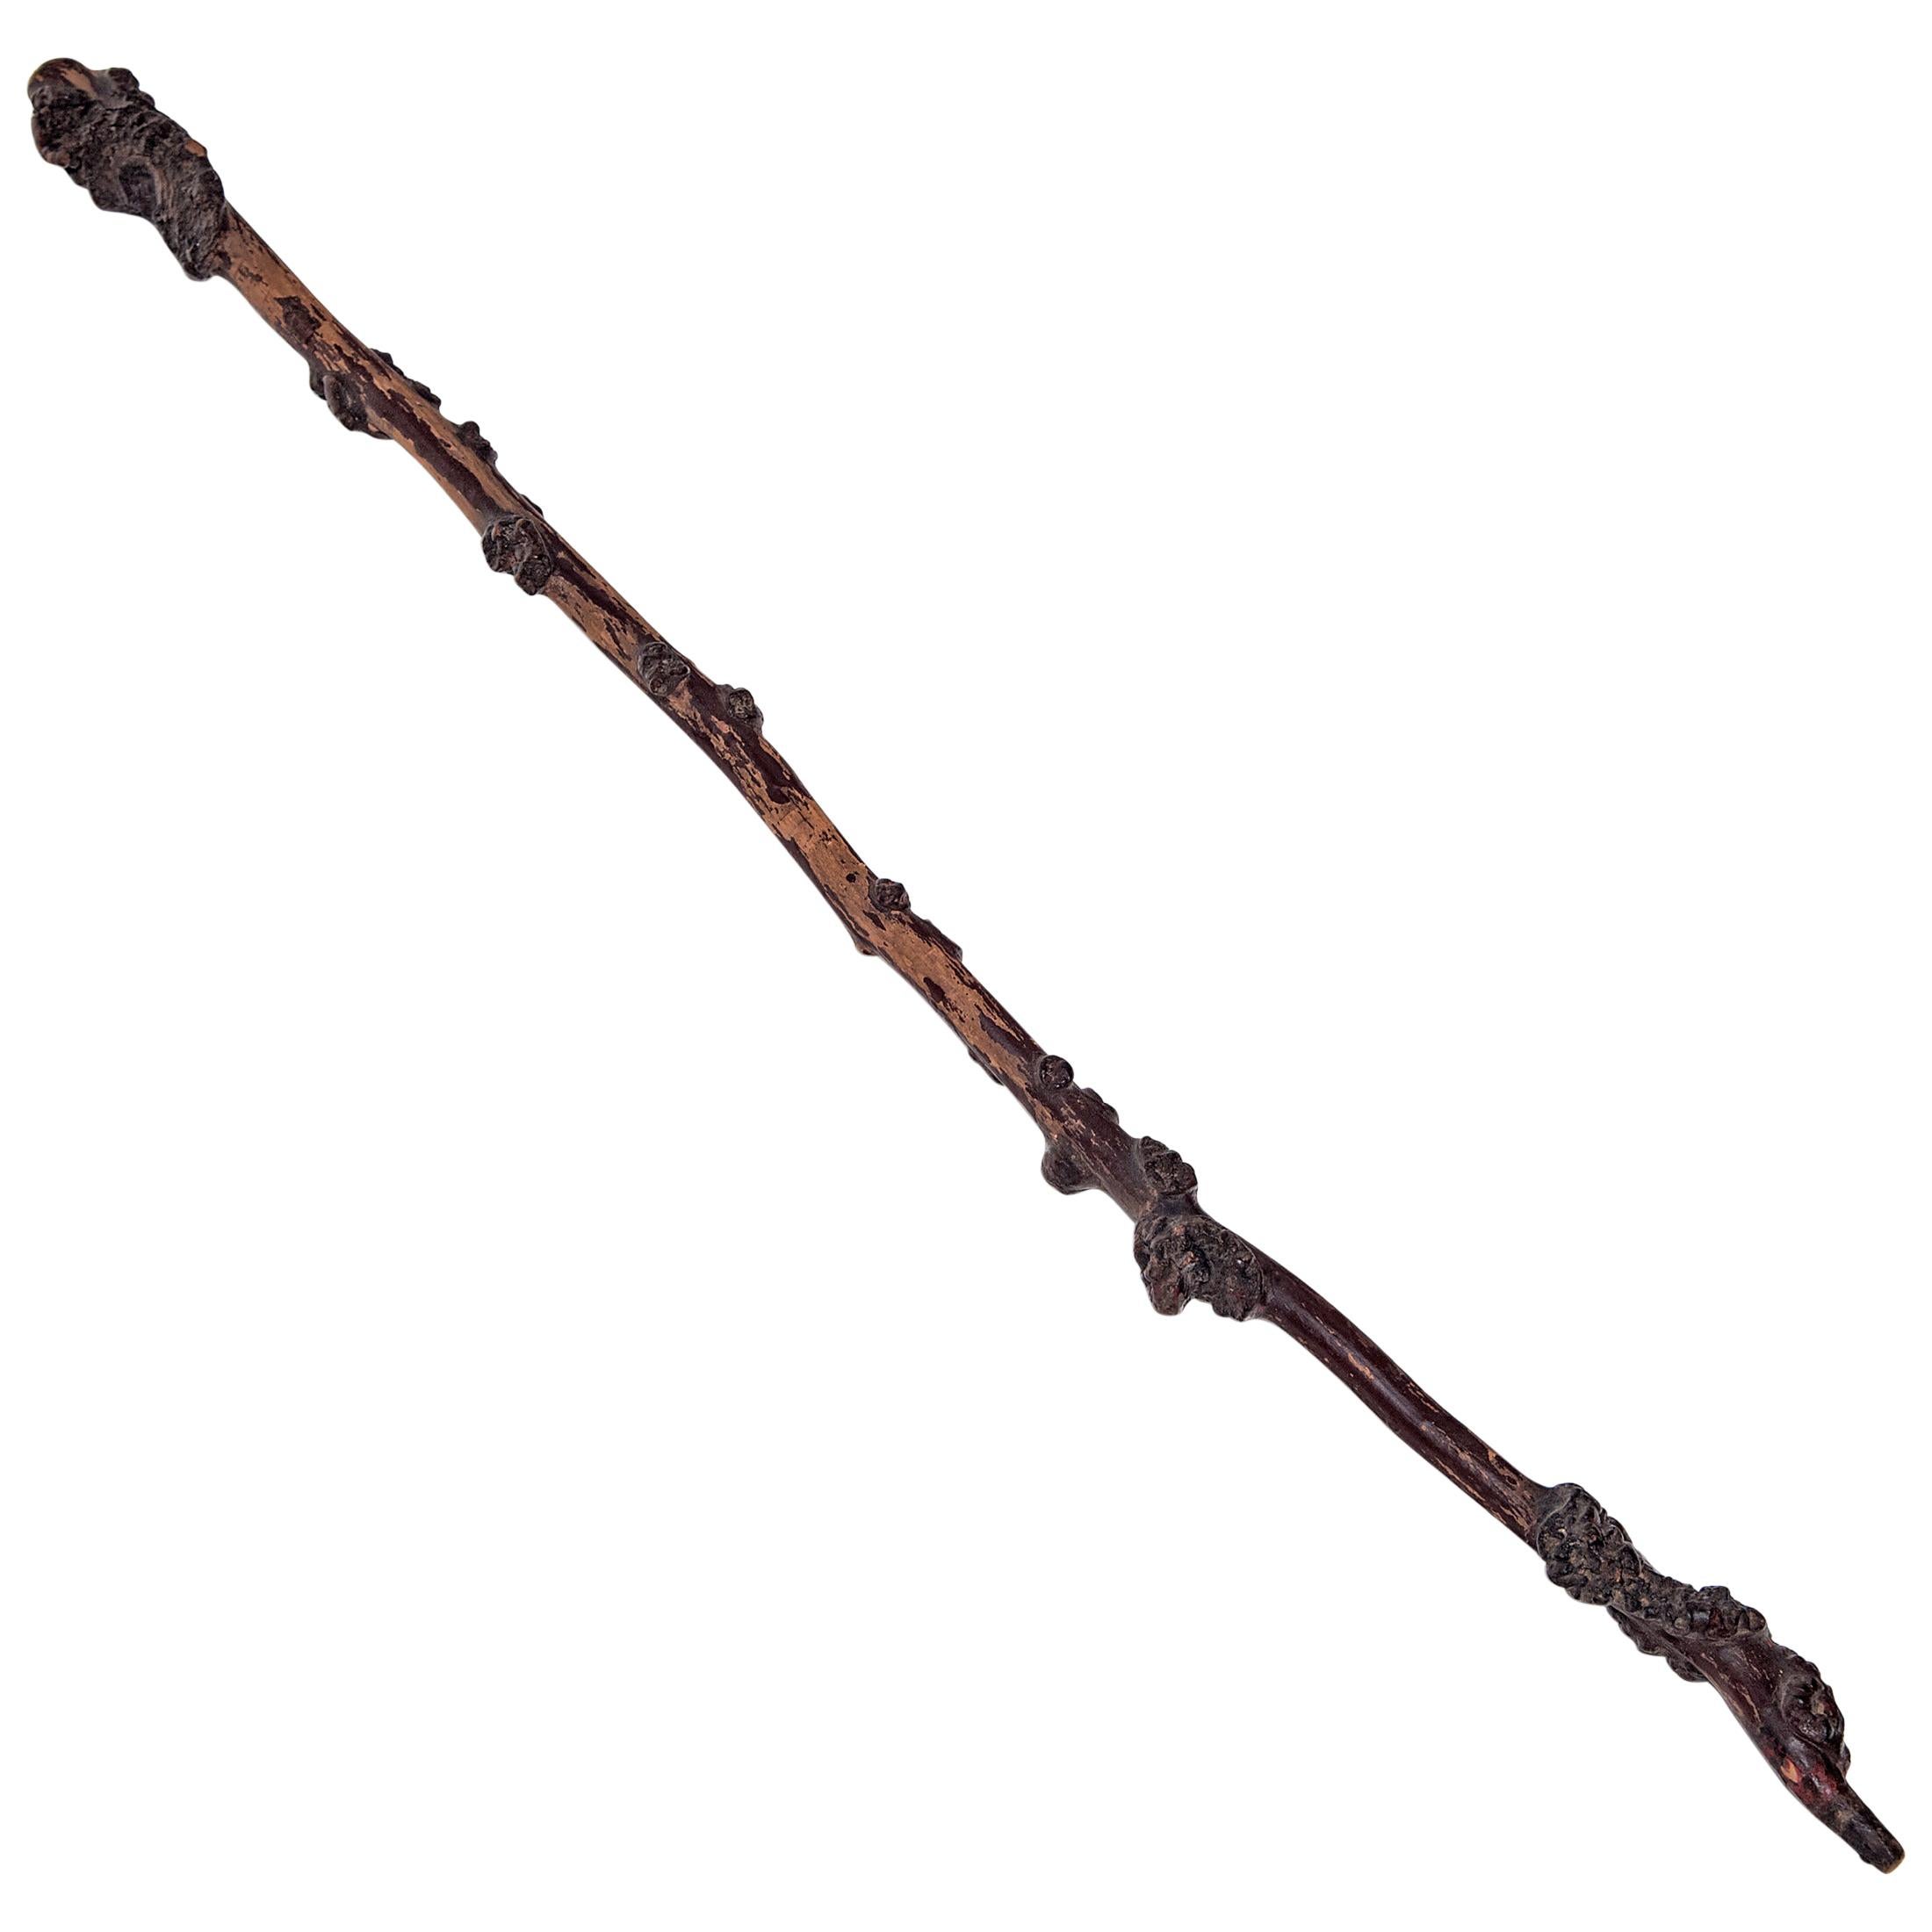 Chinese Knotted Walking Stick, c. 1900